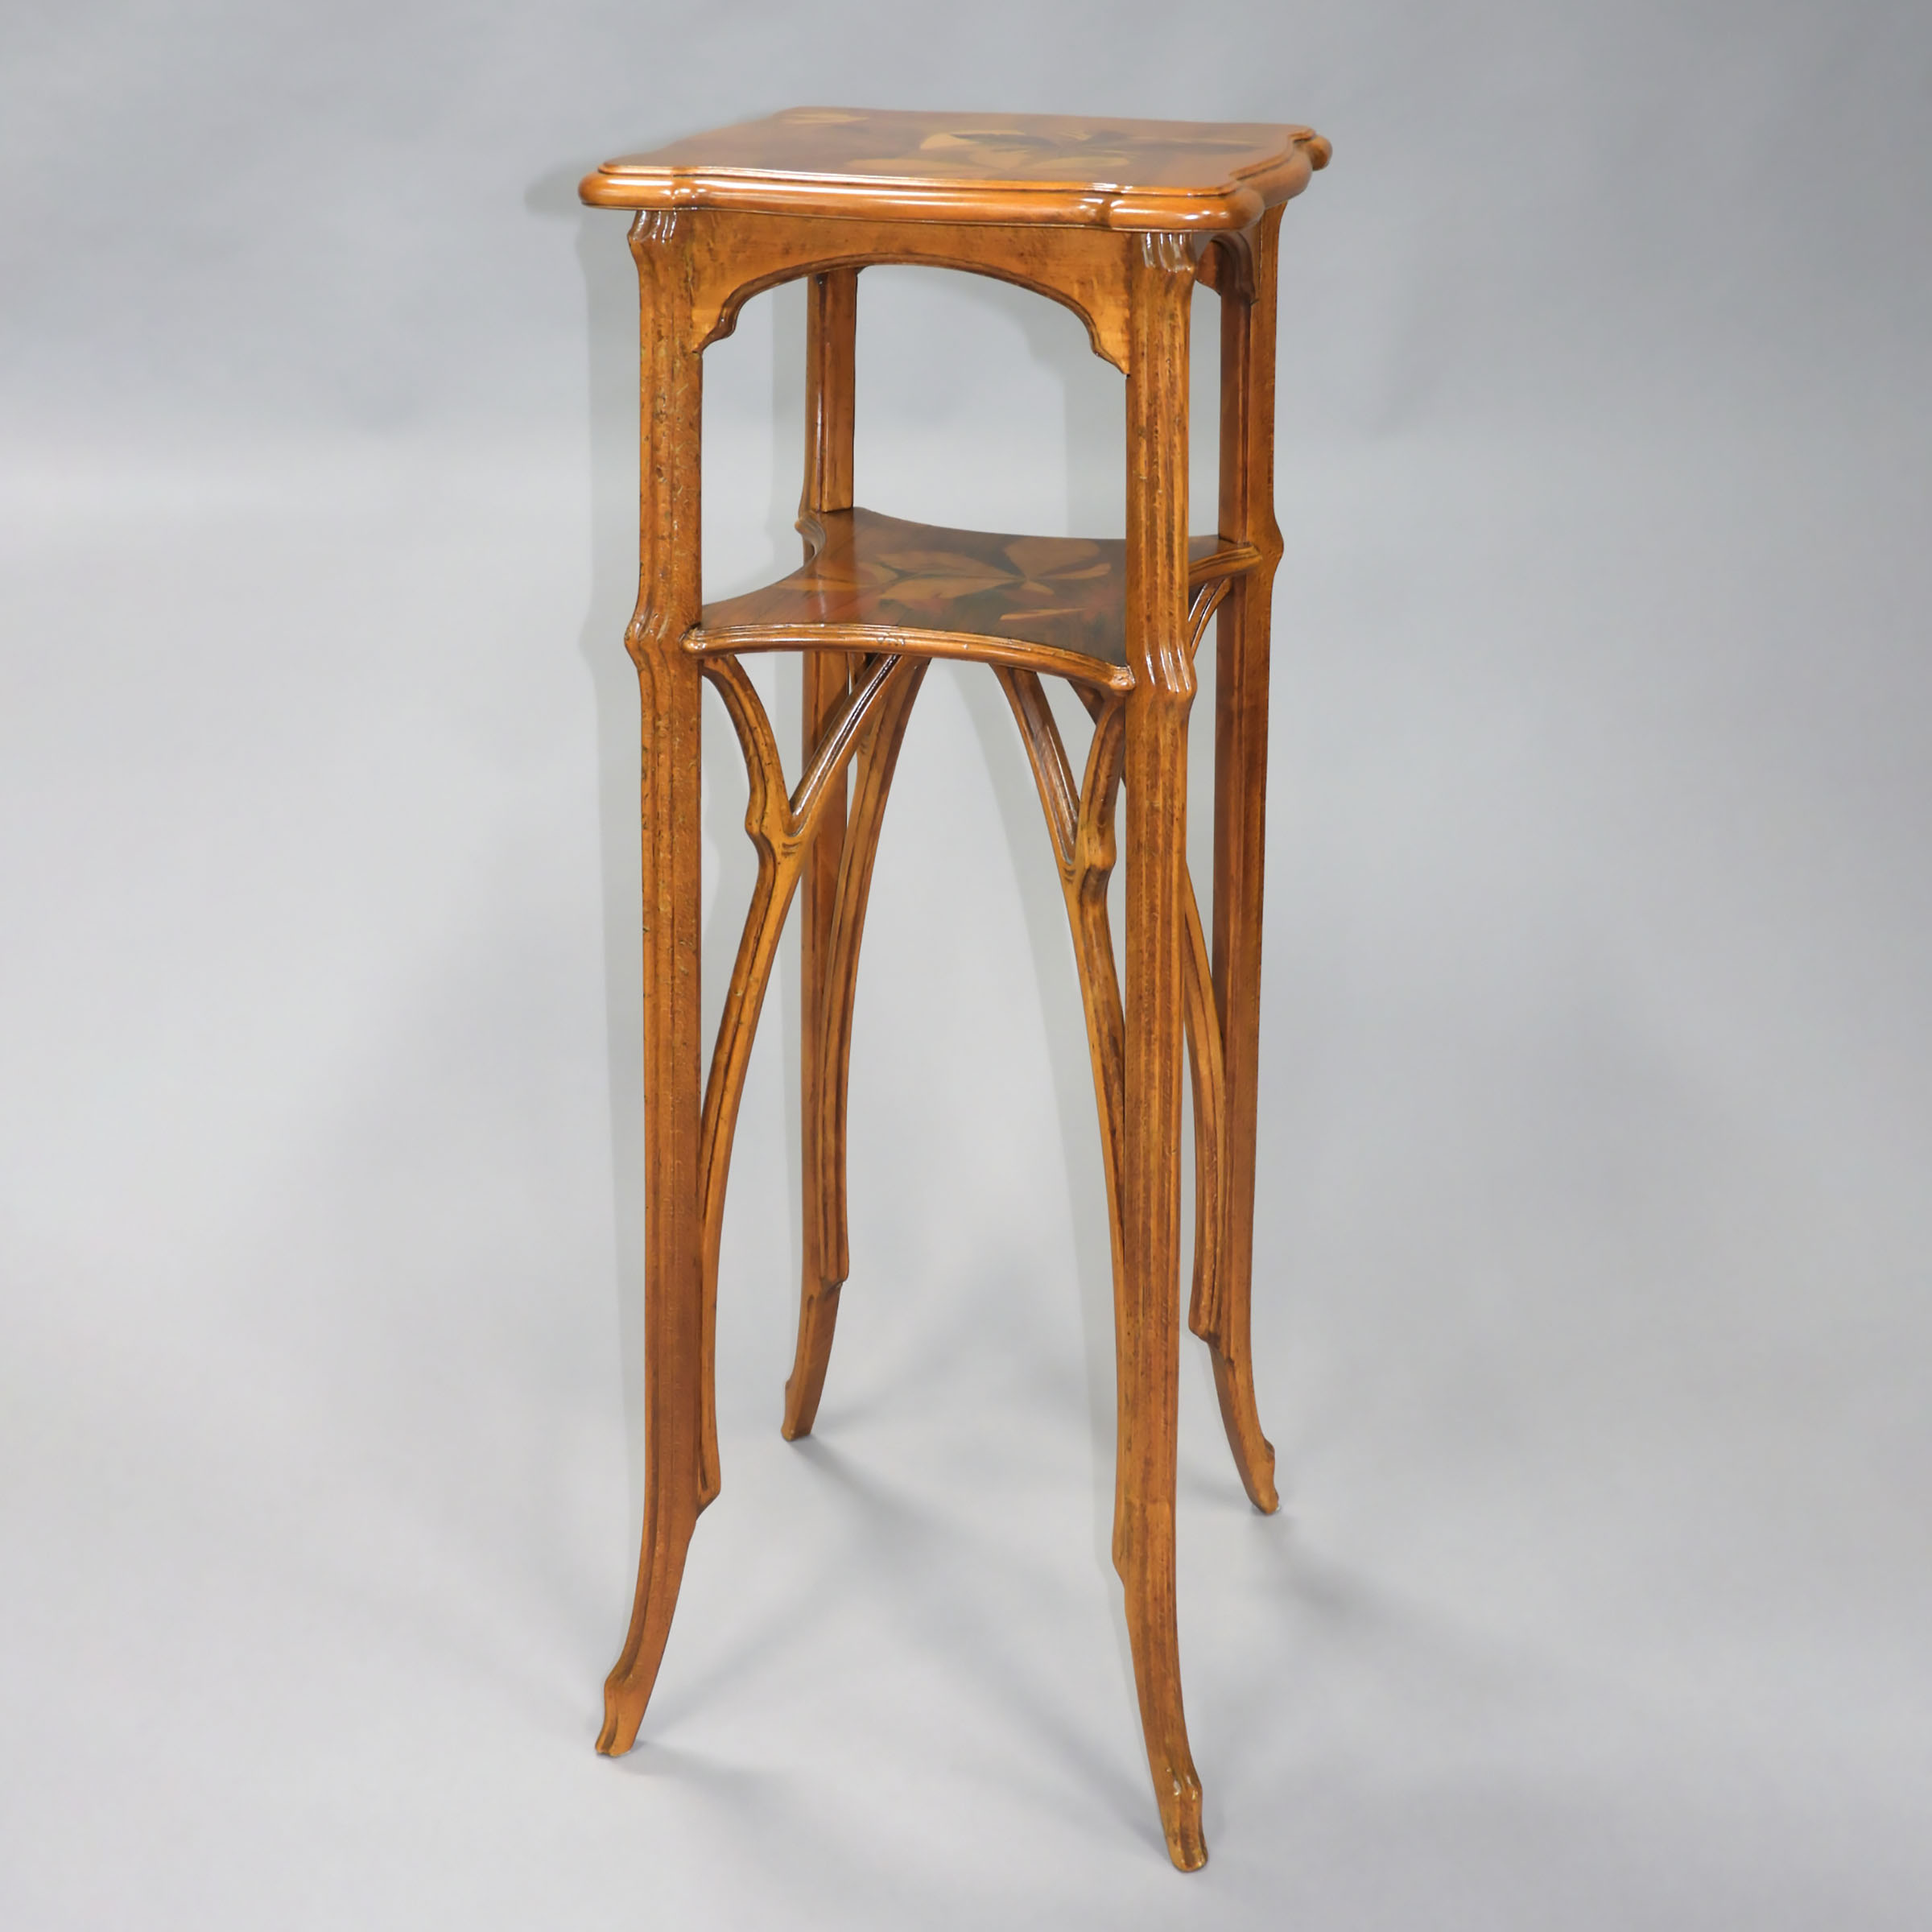 French Art Nouveau Gallé Style Marquetry Inlaid Mixed Wood Plant Stand, 19th/early20th century